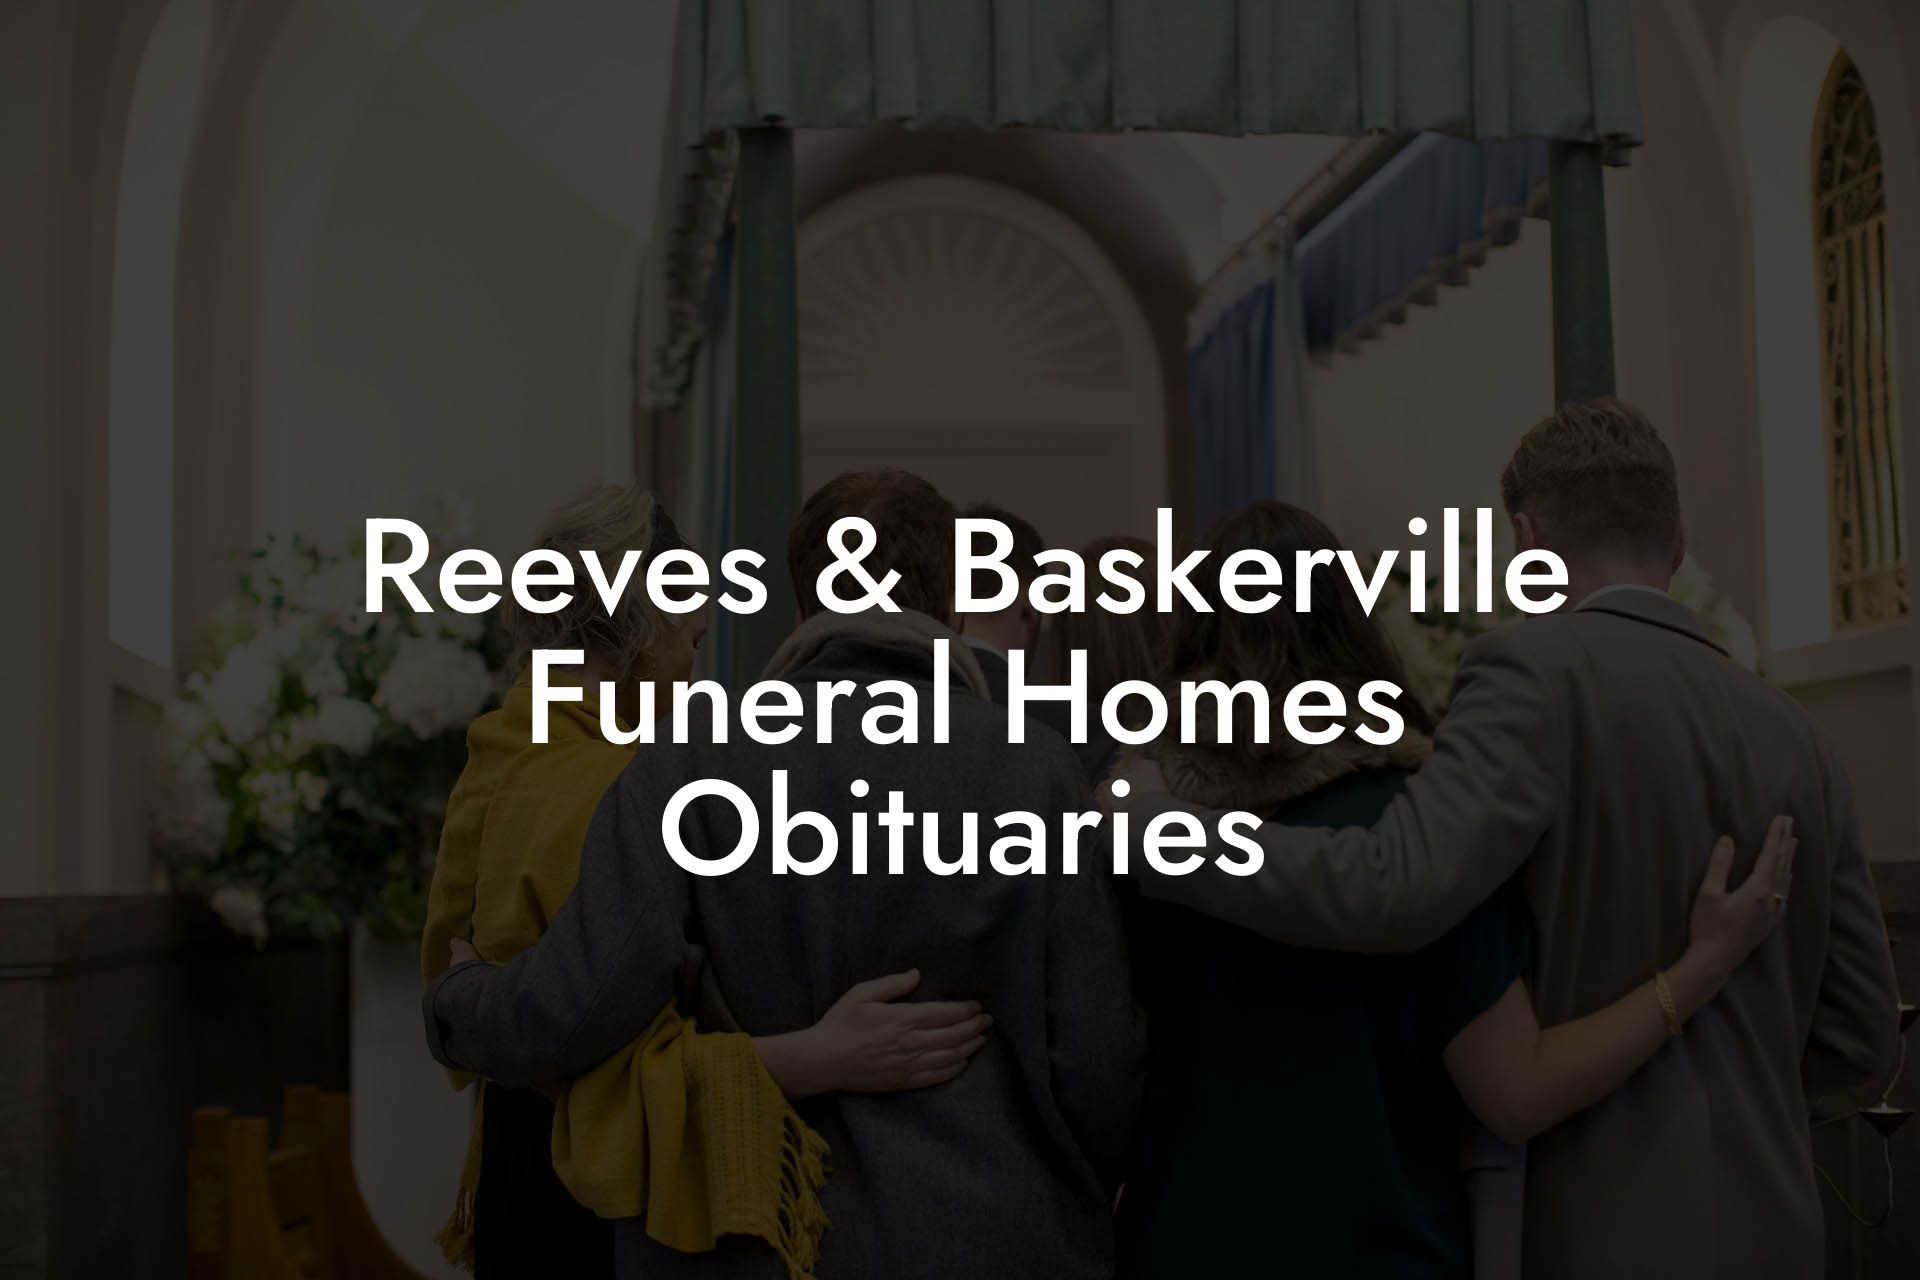 Reeves & Baskerville Funeral Homes Obituaries